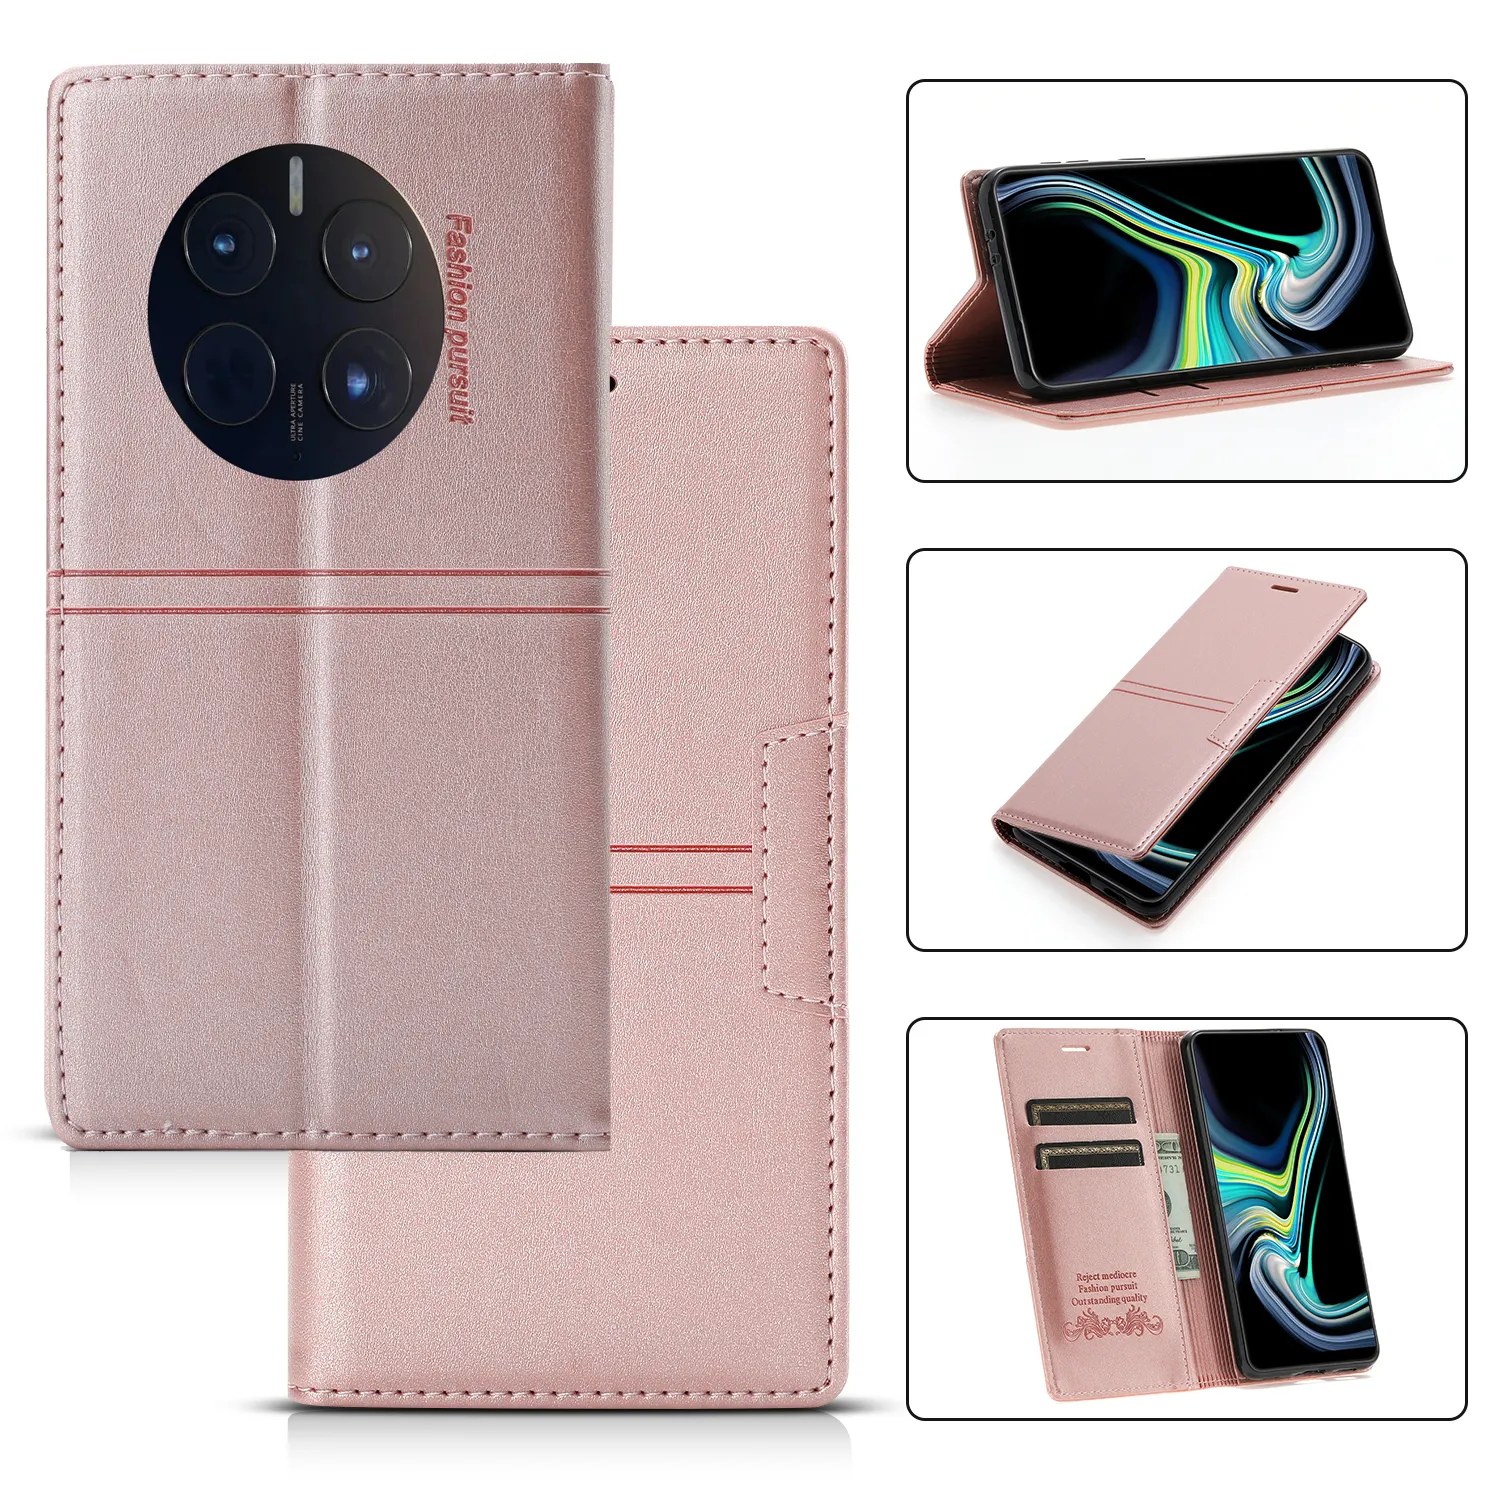 Flip PU Leather Case For Huawei Mate 50 P20 P30 P40 PRO LITE Phone Bag Shockproof PU Leather Full Protector For Mate 50 Smartphone Case With Card